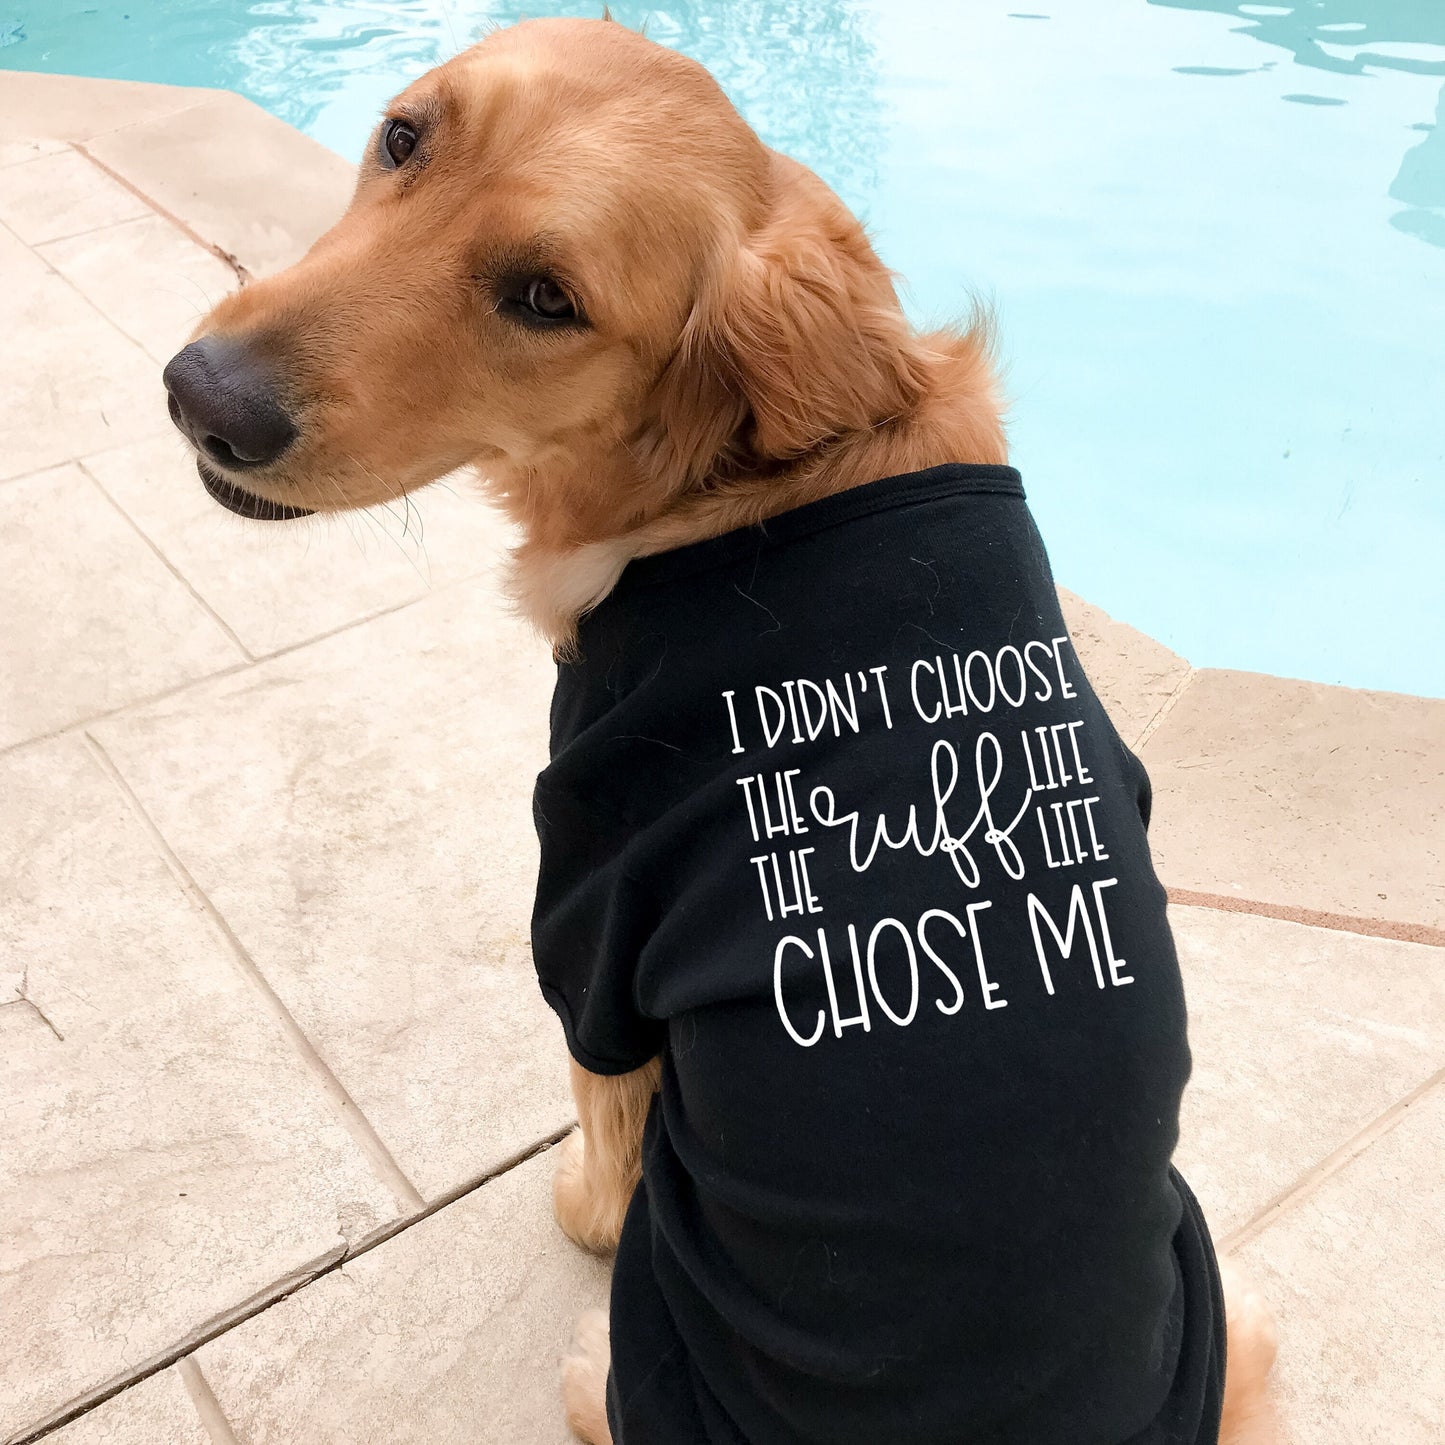 I Didn't Choose the Ruff Life the Ruff Life Chose Me Dog Tank Shirt - Sizes for any dog breed - shirt for dog - dog lover gift - dog clothes